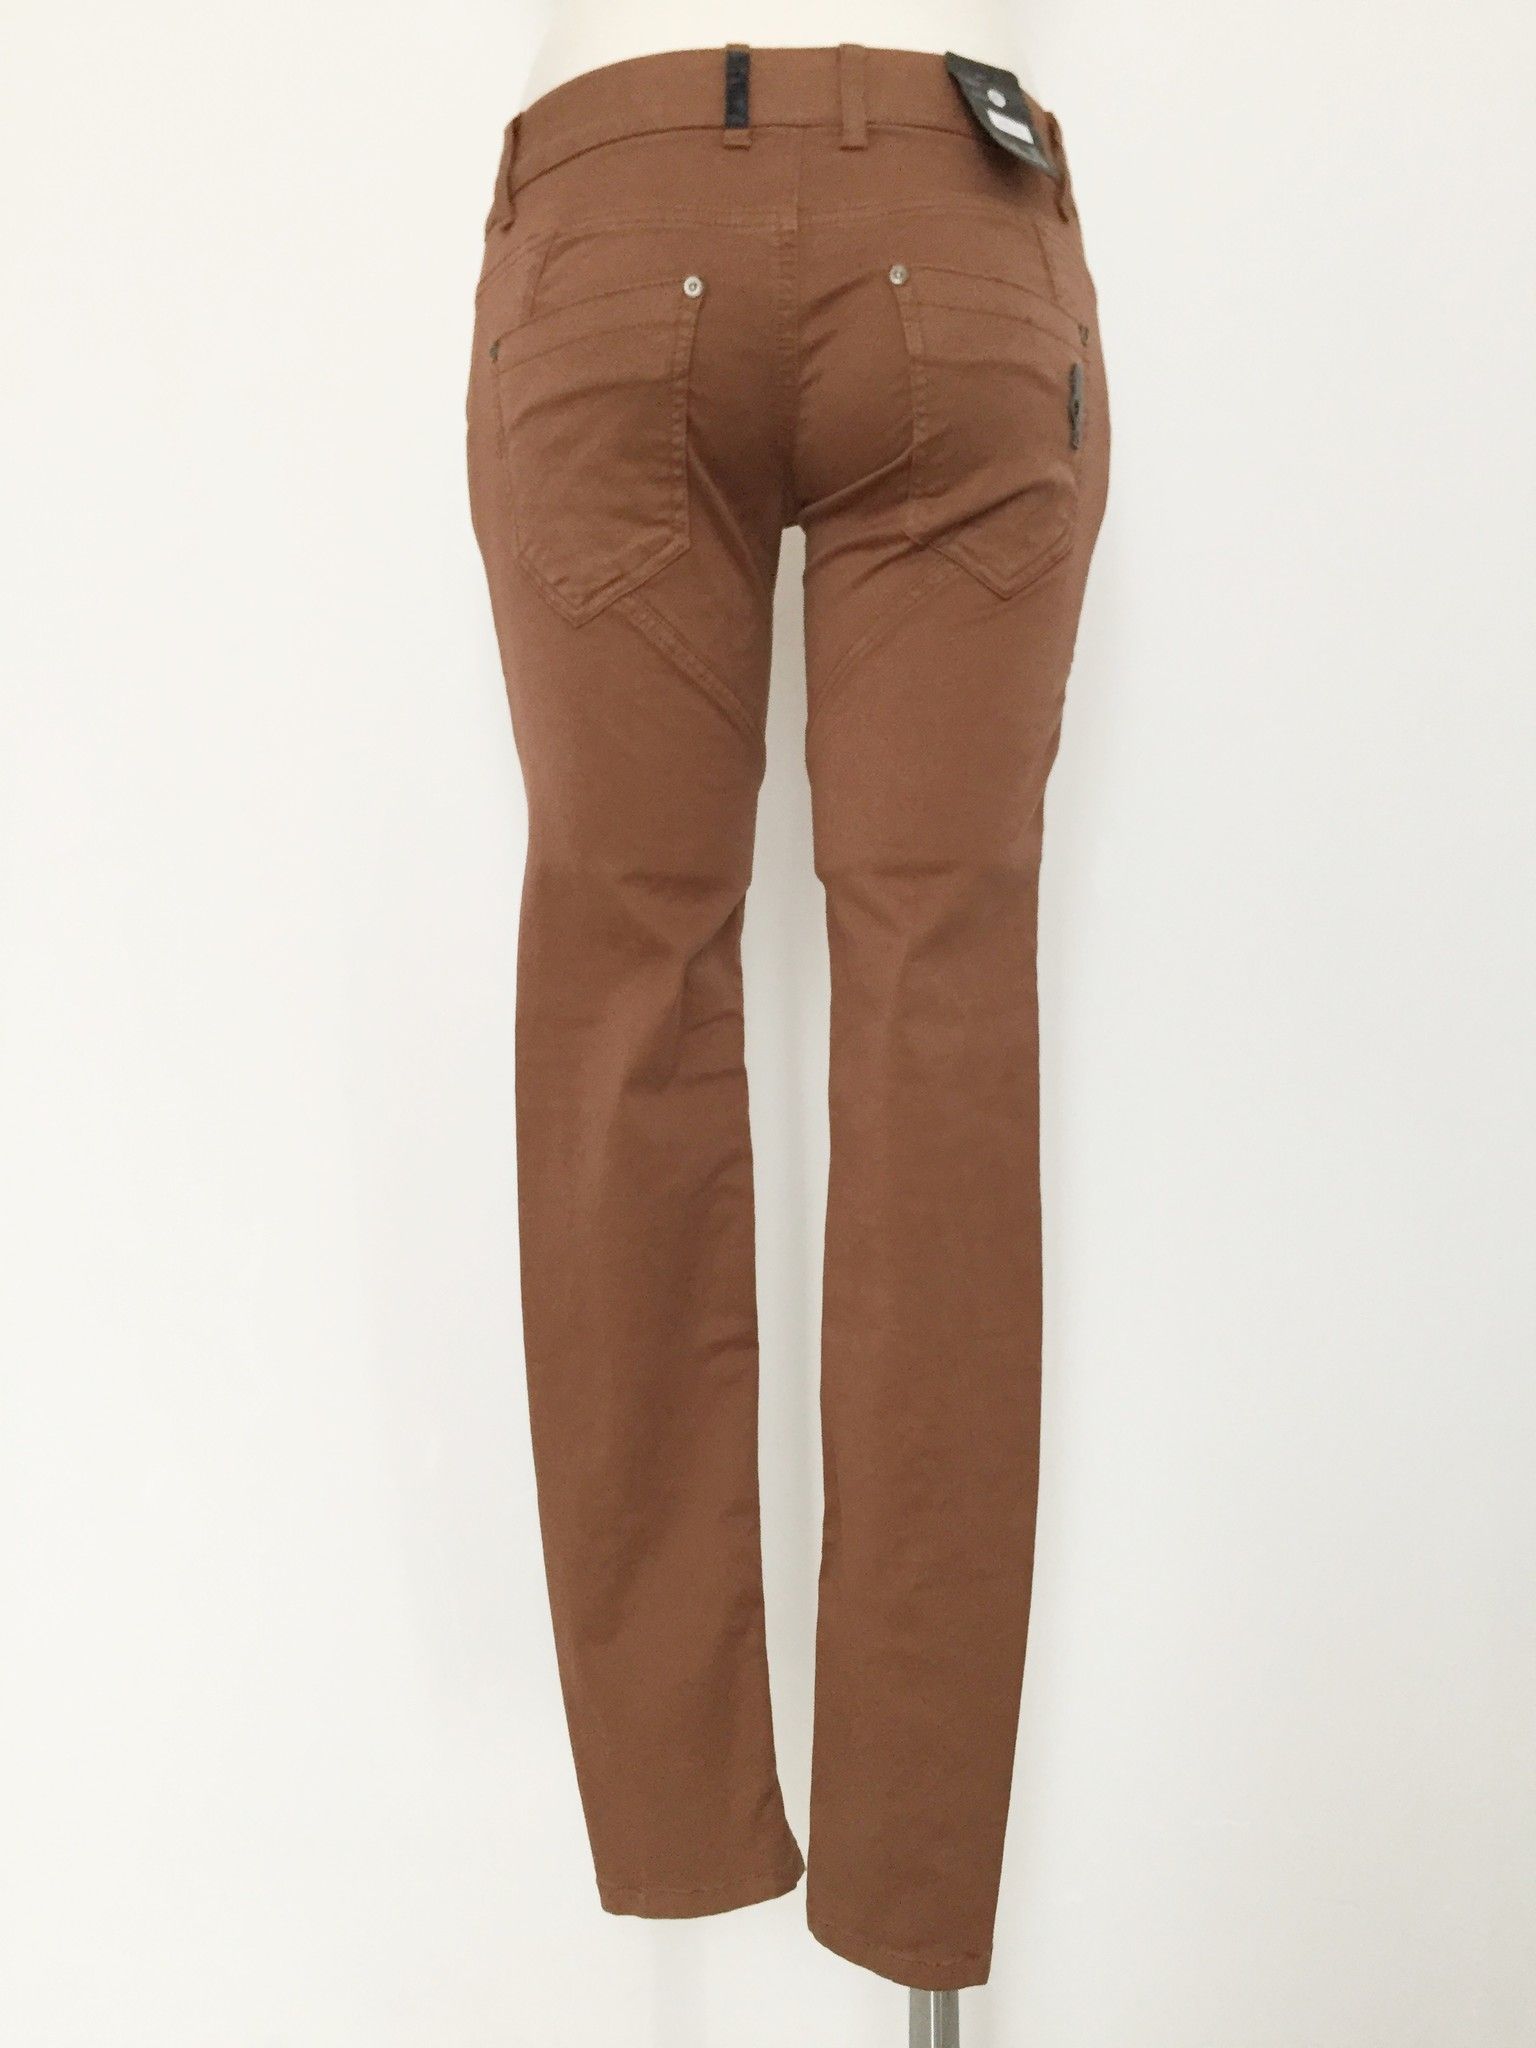 Sexy Woman Long jeans button fastening Cod.P1148161